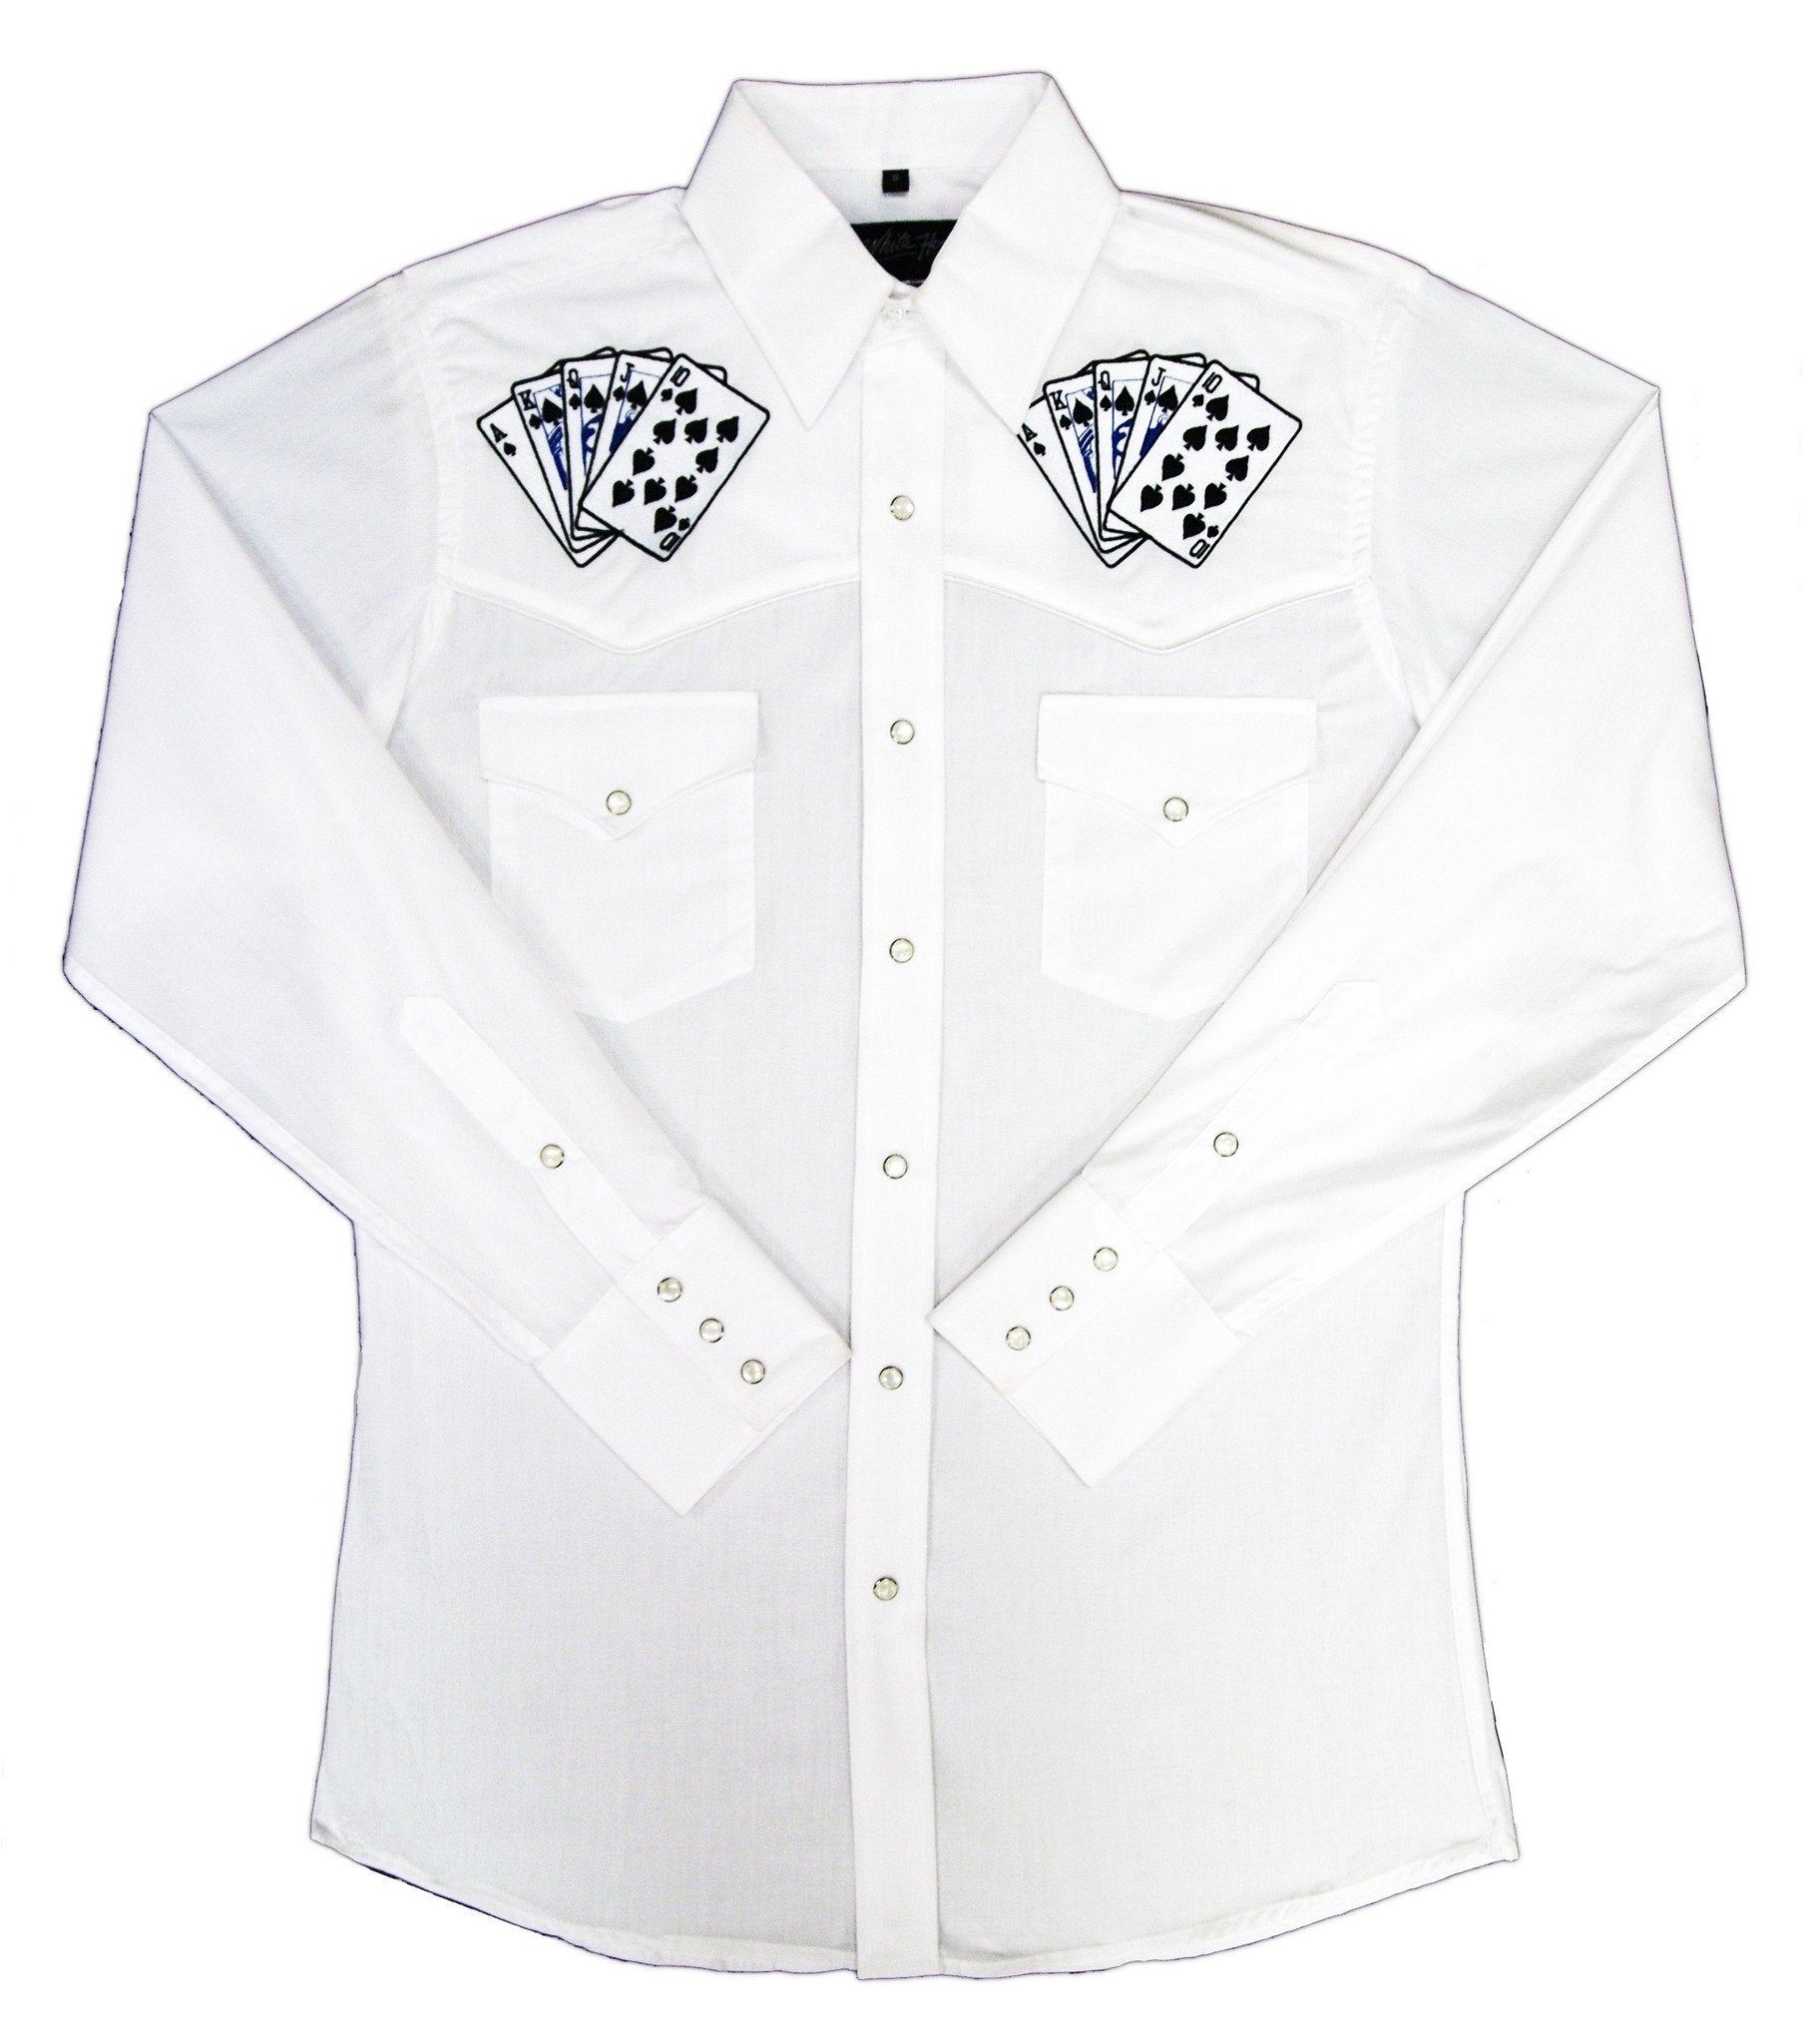 White Horse Apparel Men's Western Embroidered Shirt Royal Flush Cards on White